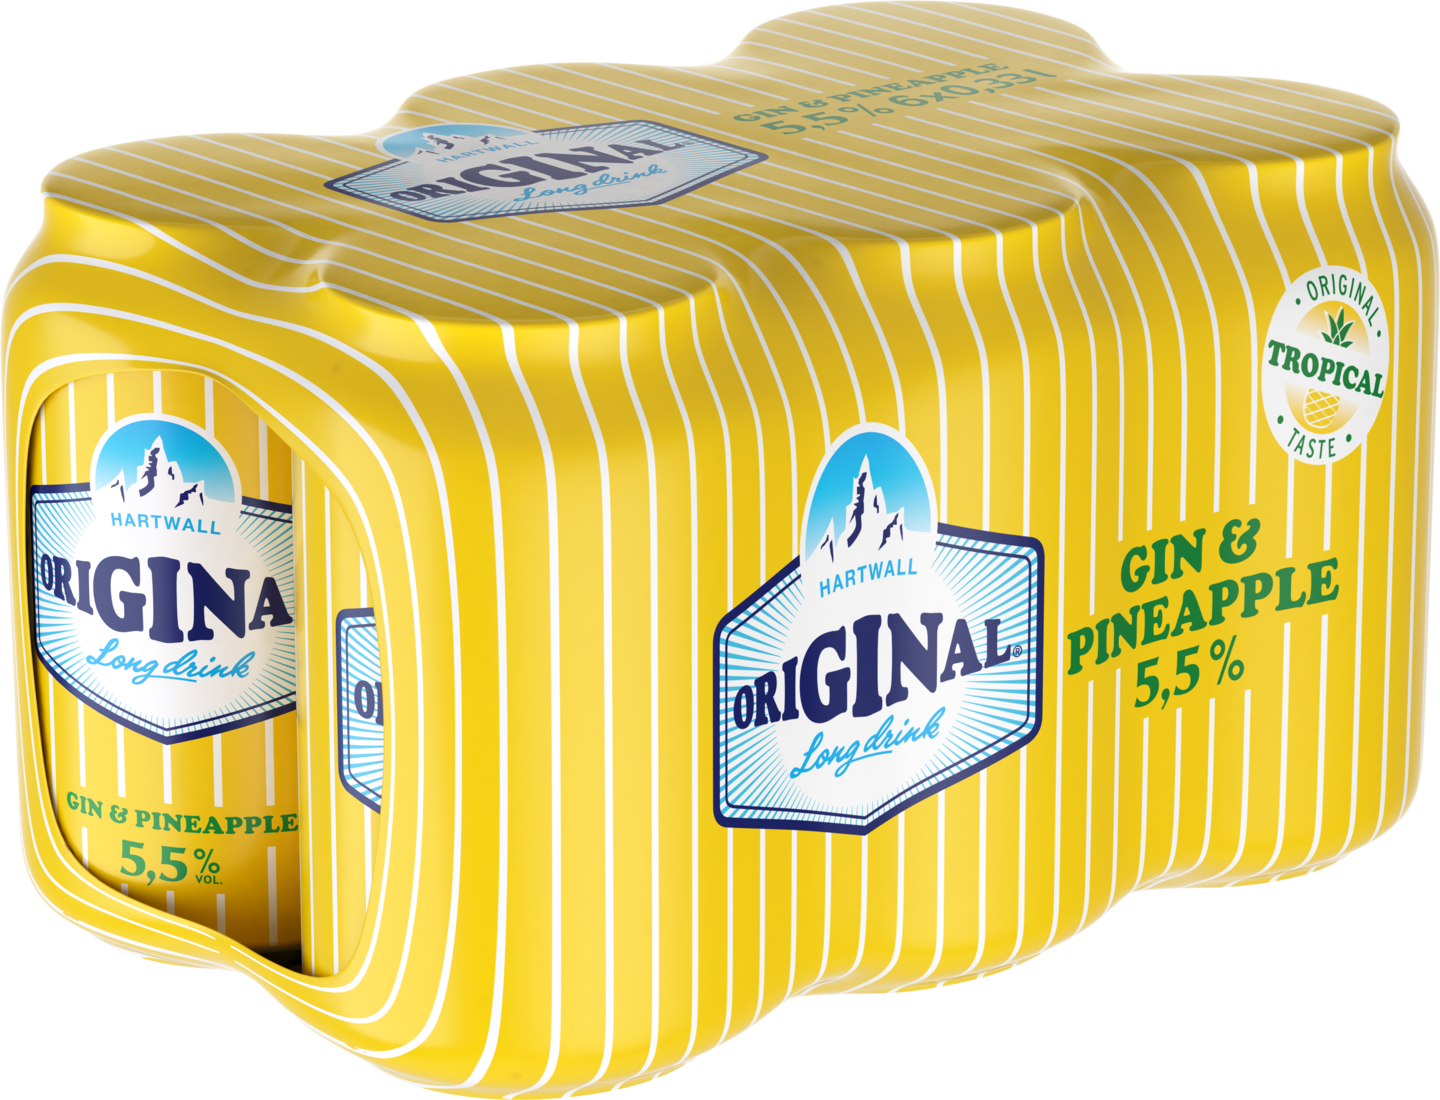 Hartwall Original Long Drink Pineapple 5,5% 0,33l 6-pack DOLLY